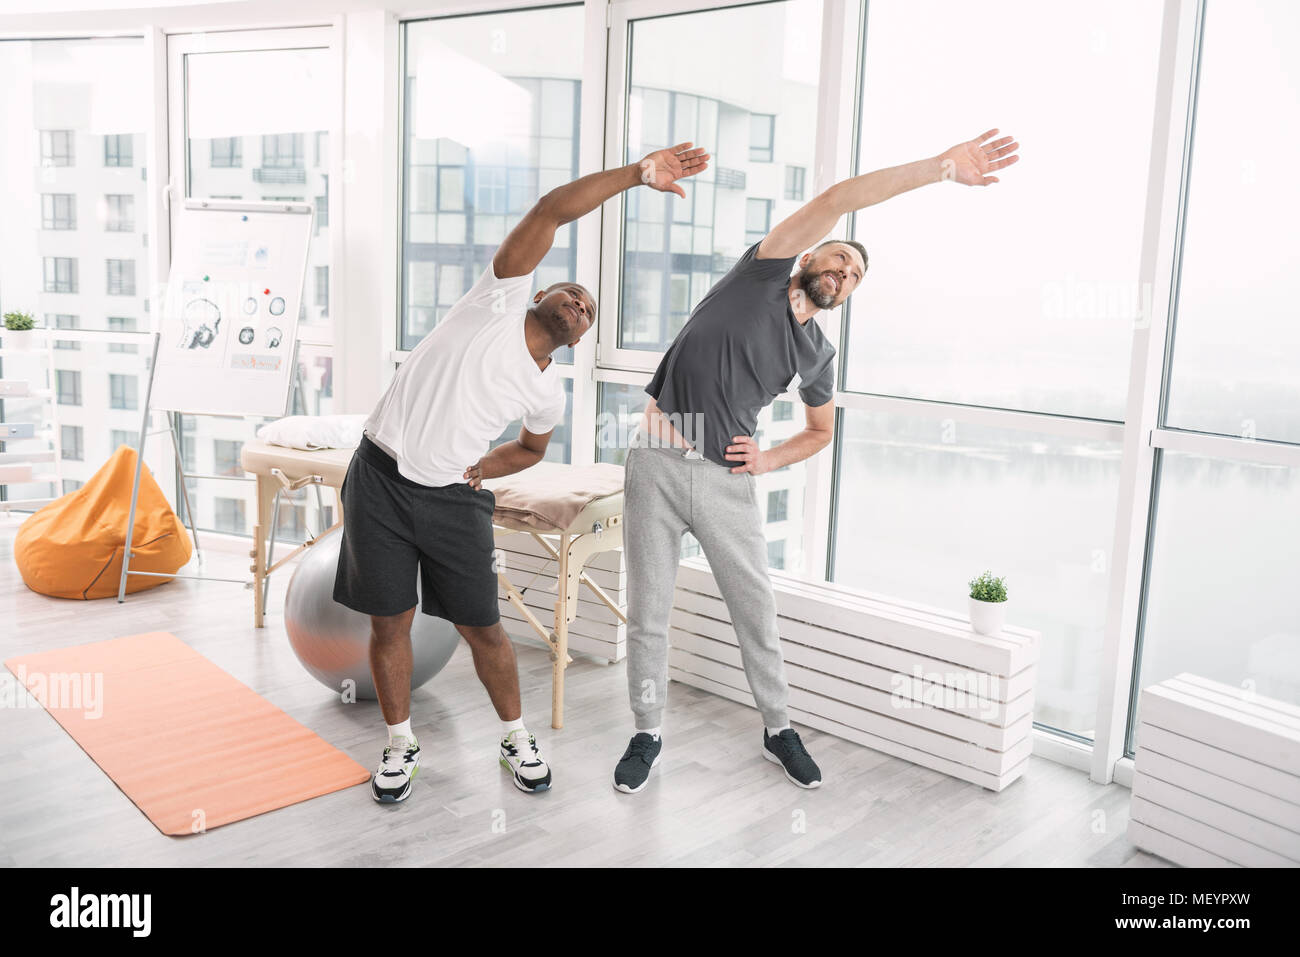 Positive sporty men doing physical activities Stock Photo